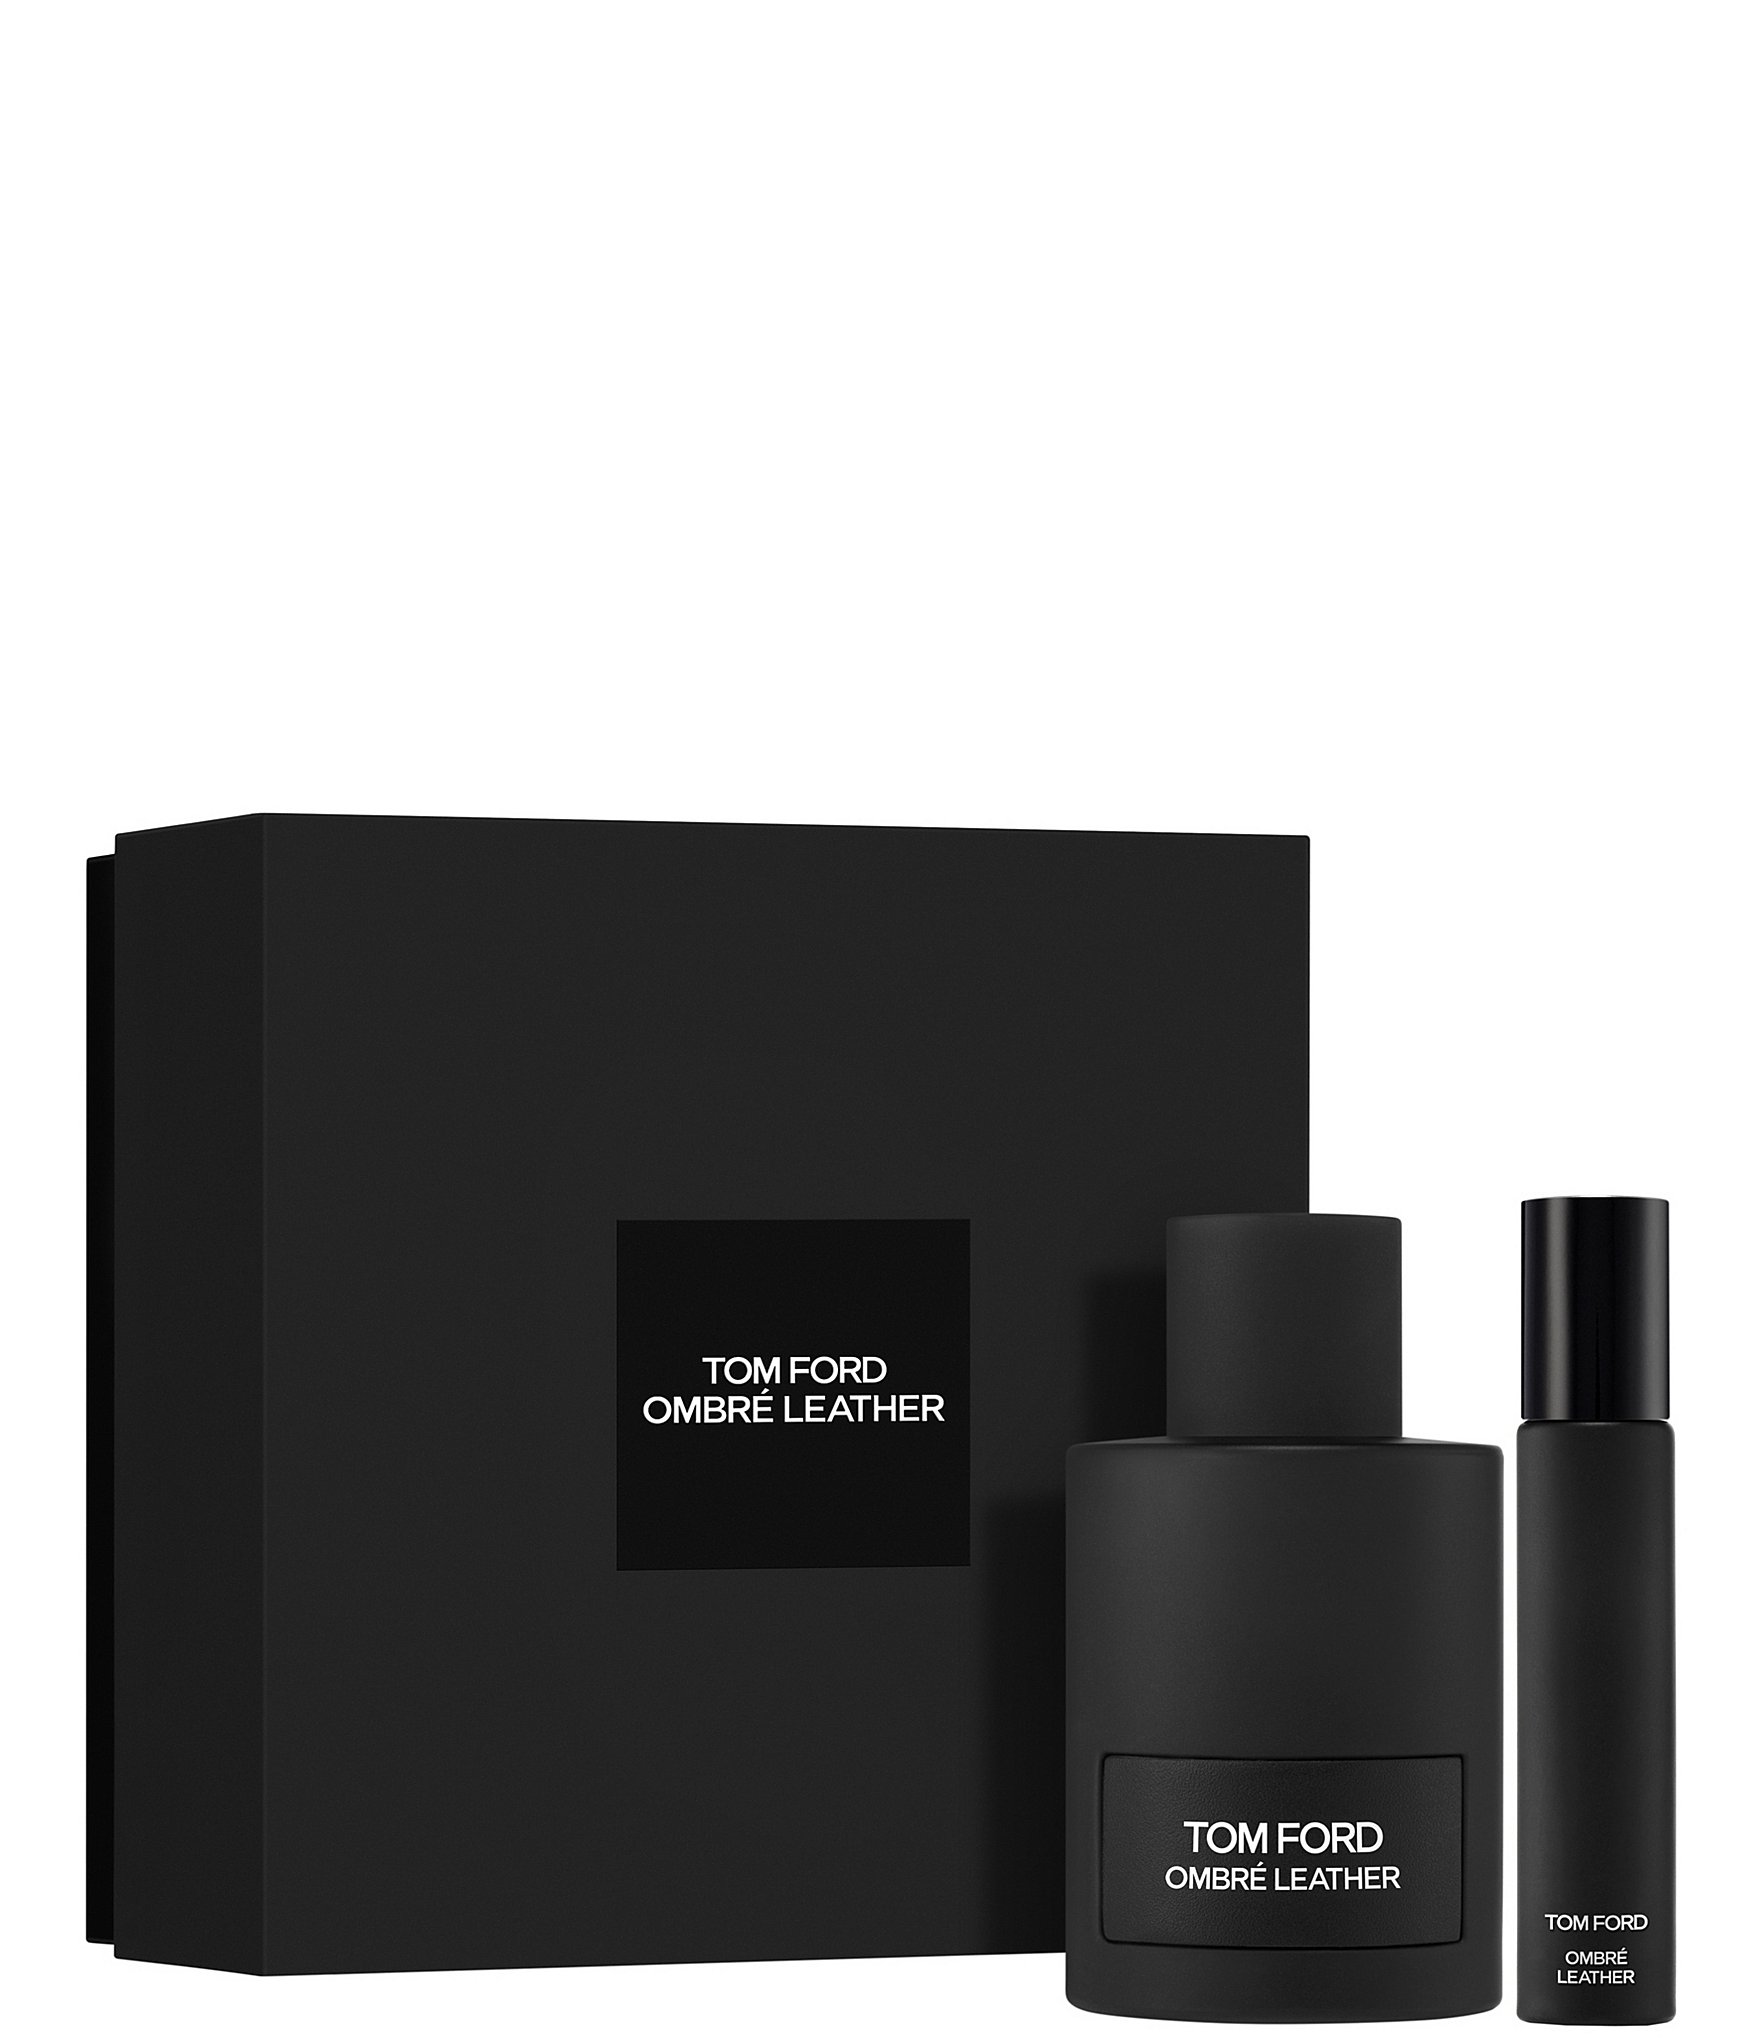 TOM FORD Ombre Leather Eau de Parfum with Travel Spray Gift Set | Dillard's